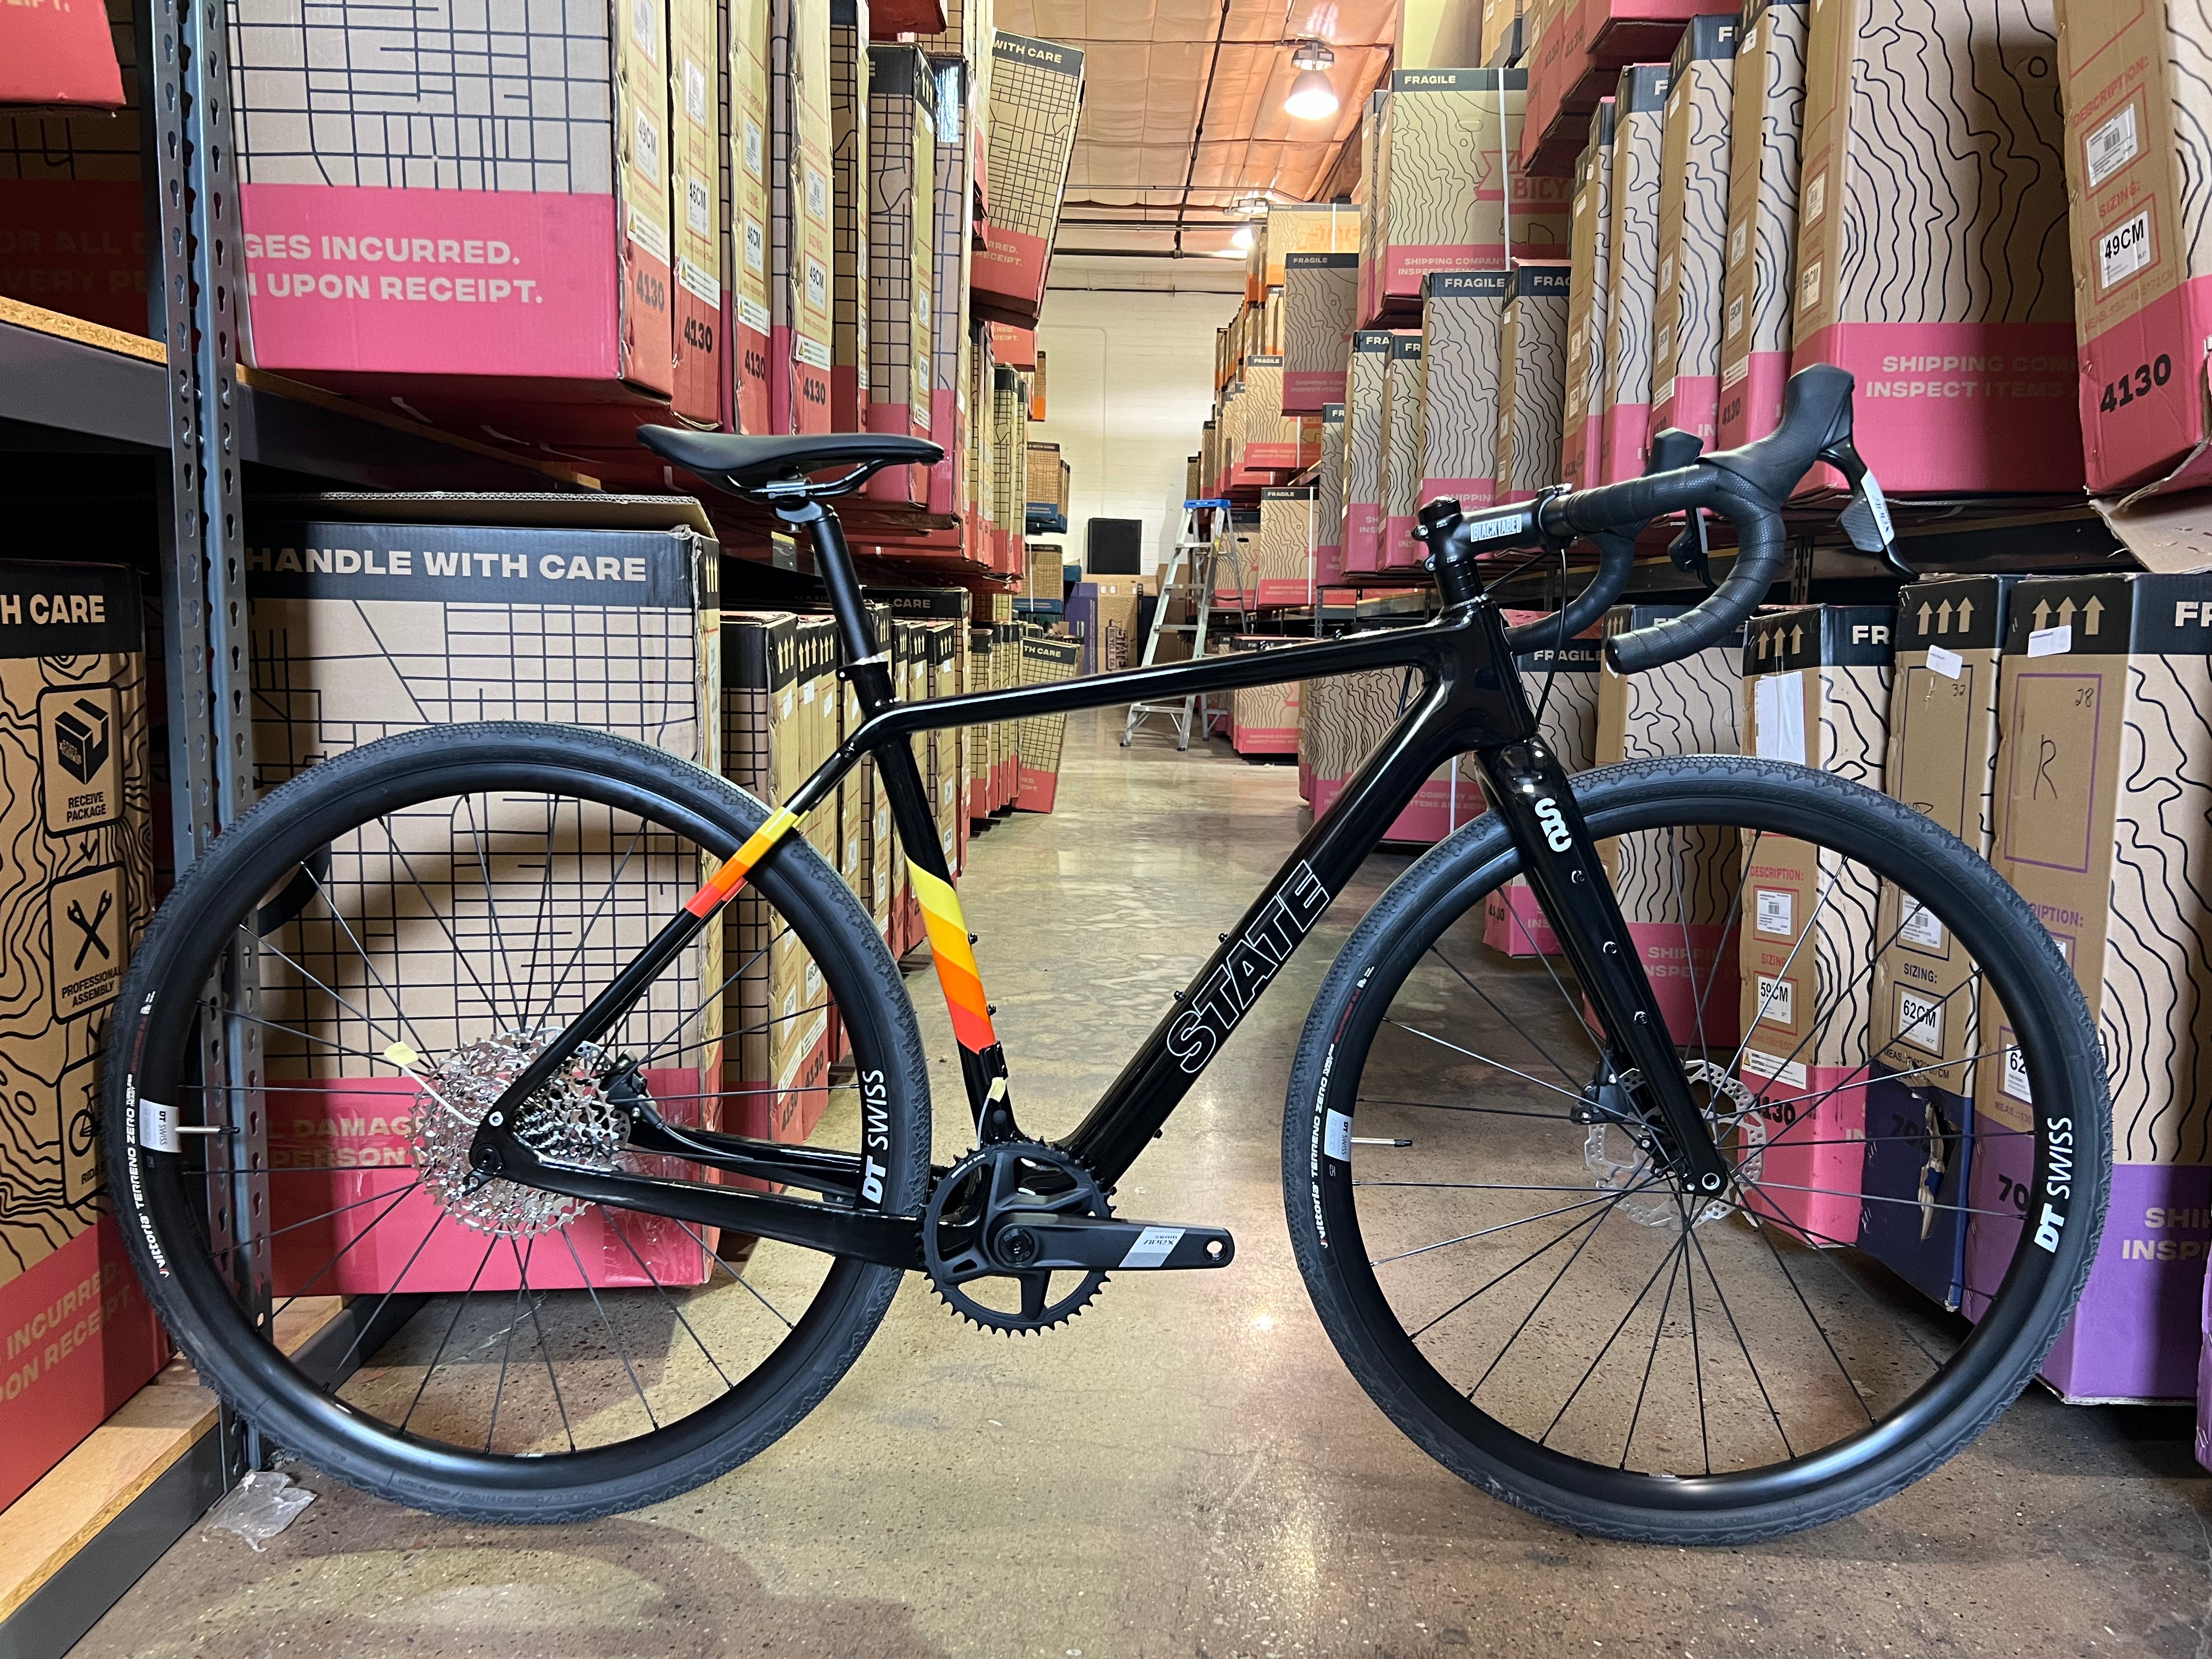 #919 - Carbon All-Road - Black Ember 700c w/ Apex XPLR Upgrade + DT Swiss wheels - X-Small - Like-New Condition